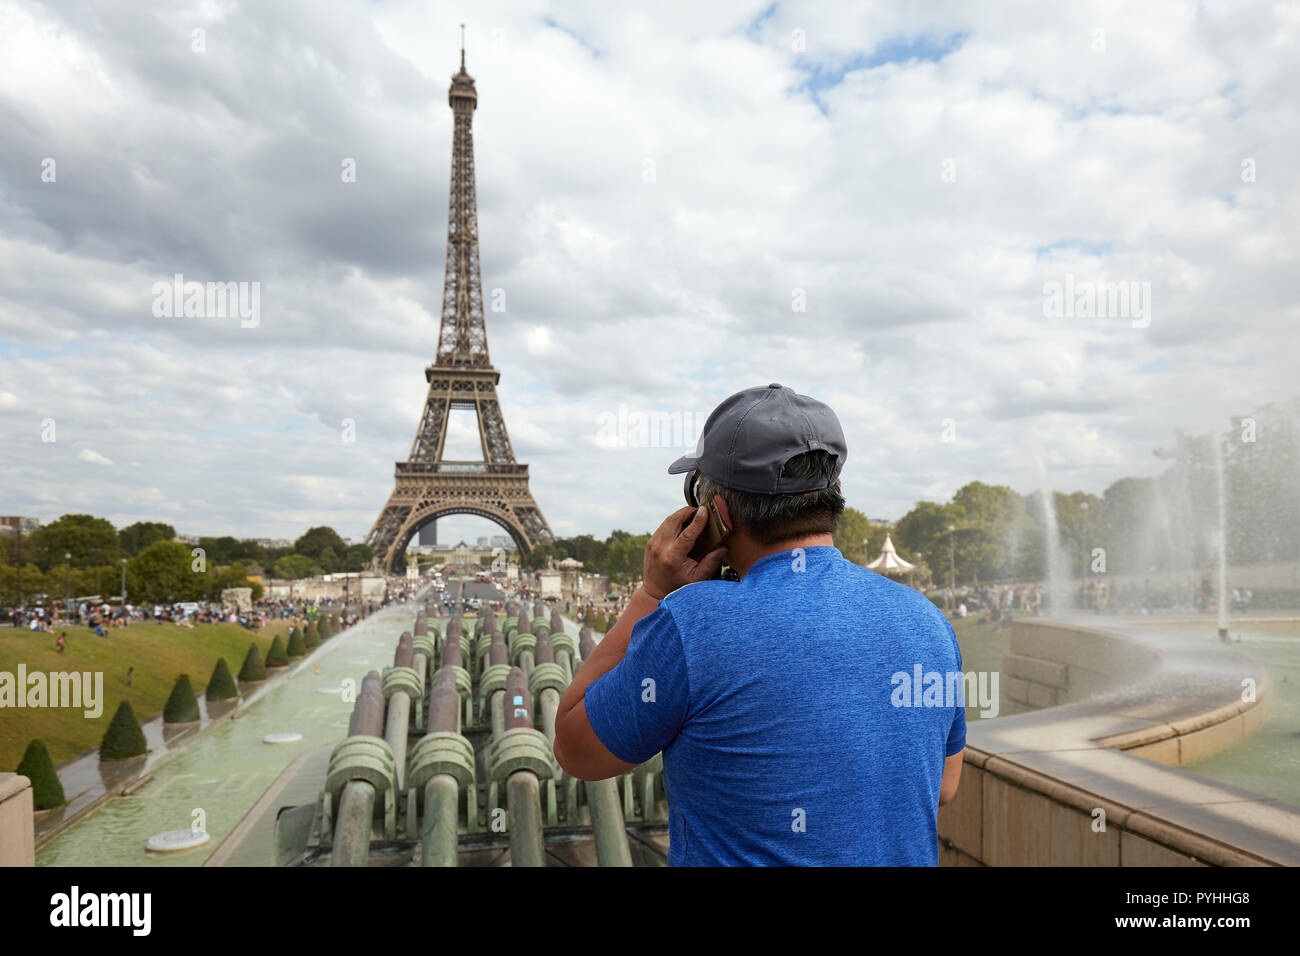 Paris, Ile-de-France, France - A man with a mobile phone on his left ear stands above the fountain in the Jardins du Trocadéro with the Eiffel Tower in the background. Stock Photo